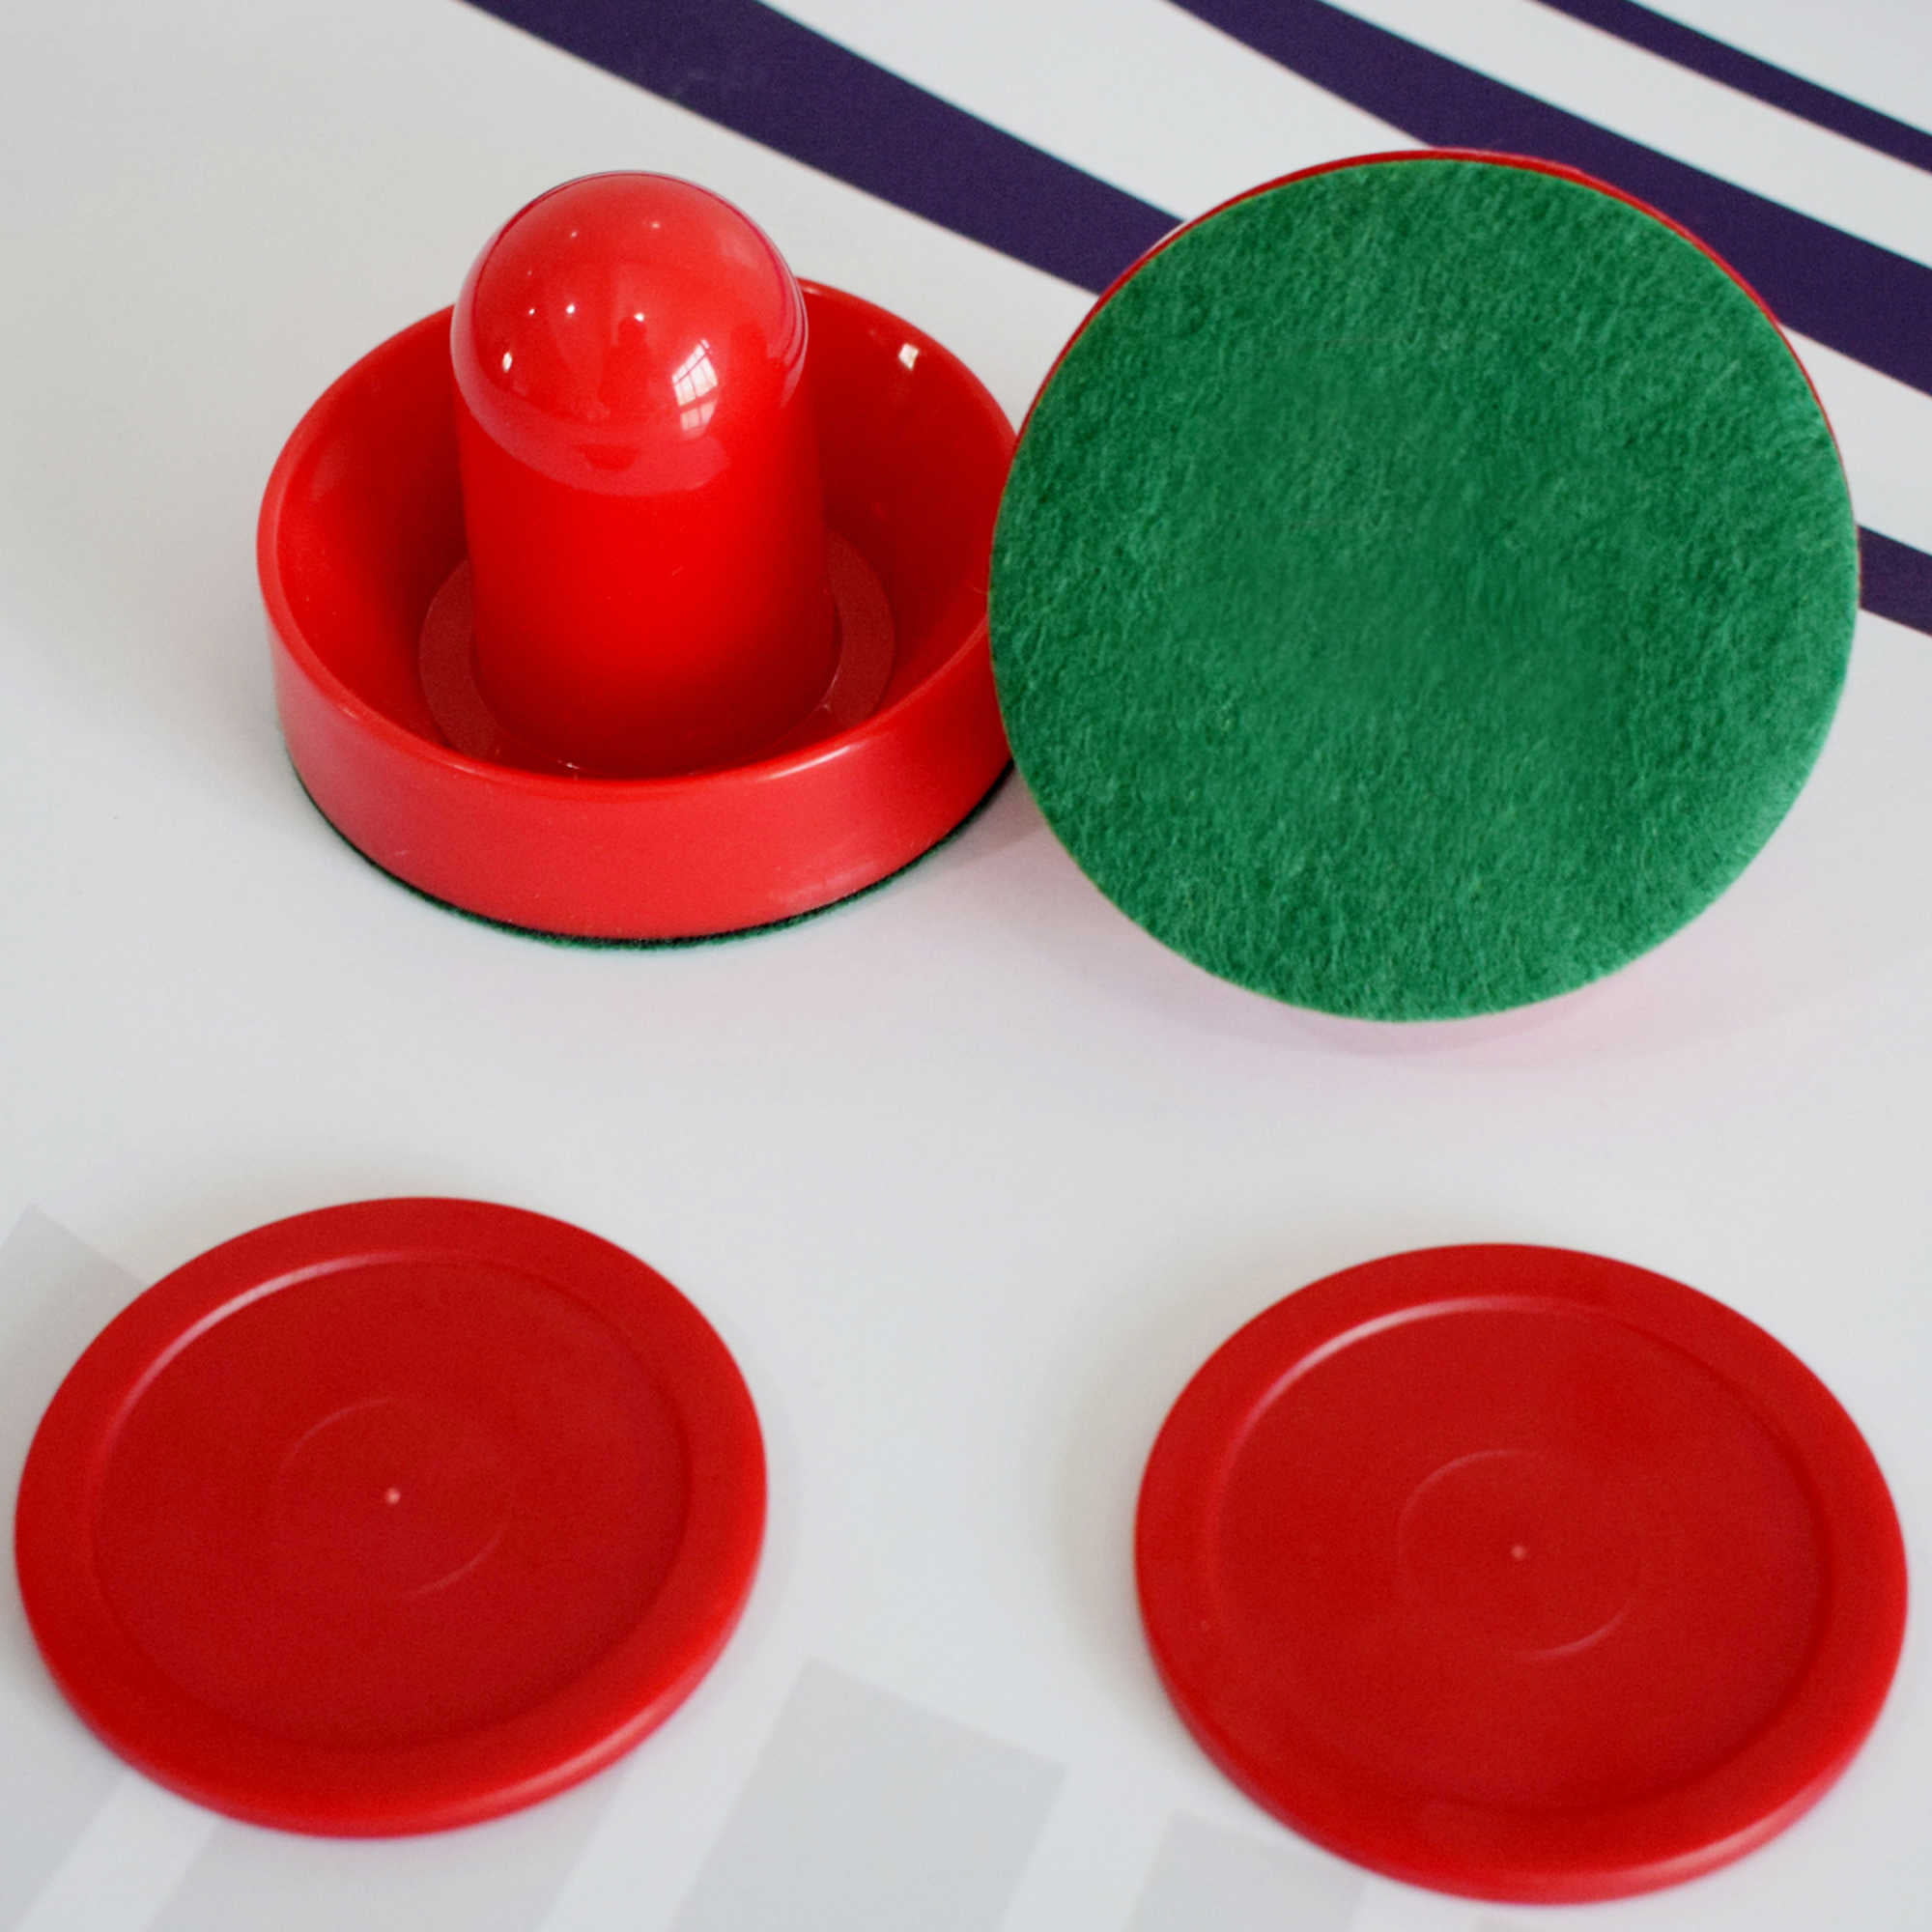 Free Shipping Two Mallets & Pucks Set For Carrom Table Top Air Hockey Games 